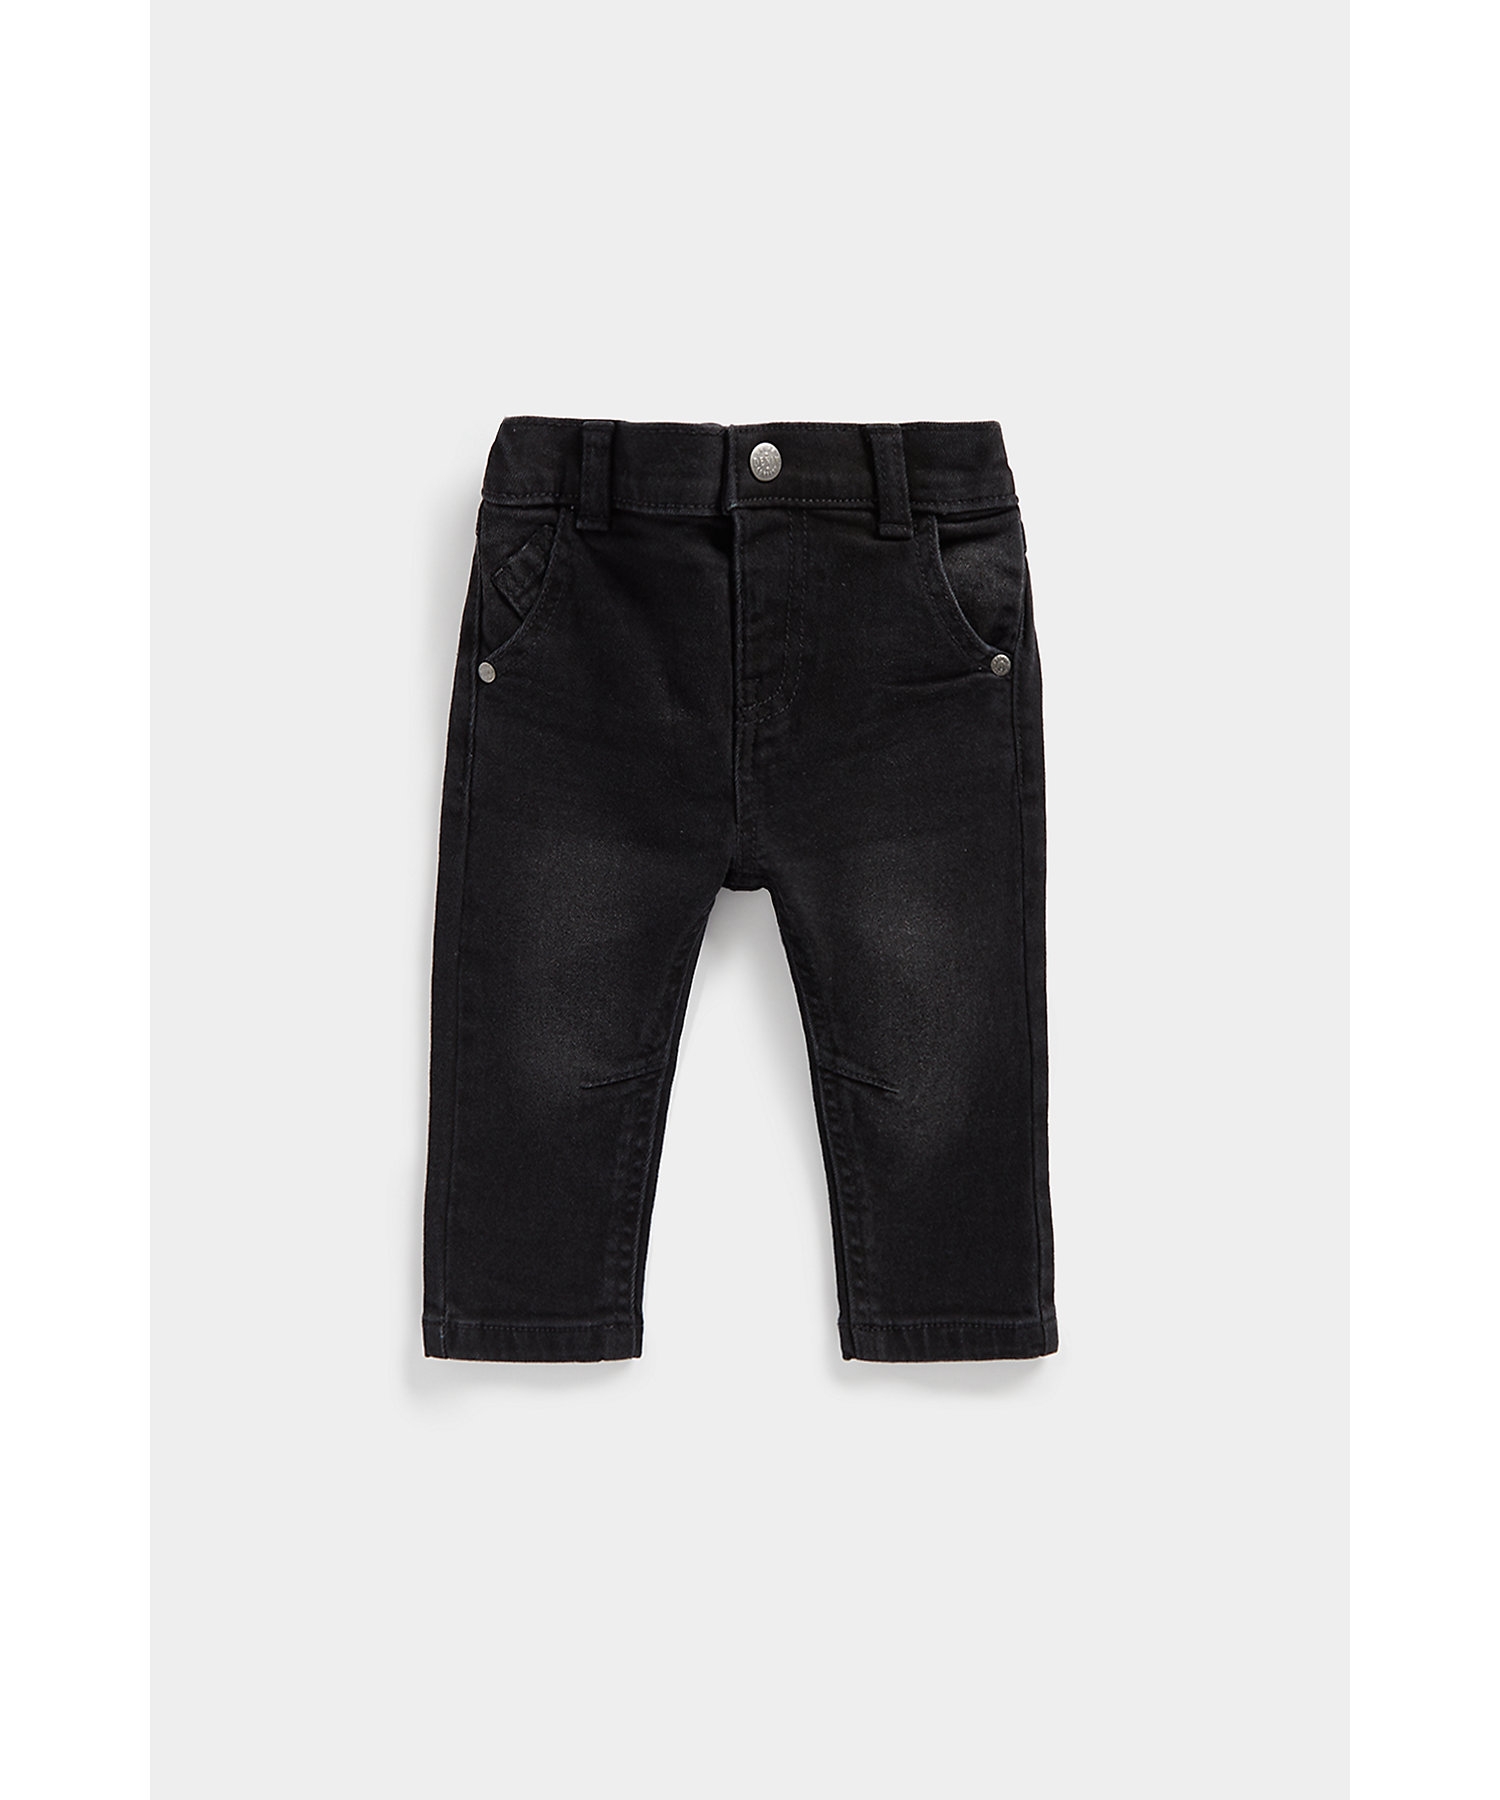 Mothercare | Boys Stretchy Jeans -Black